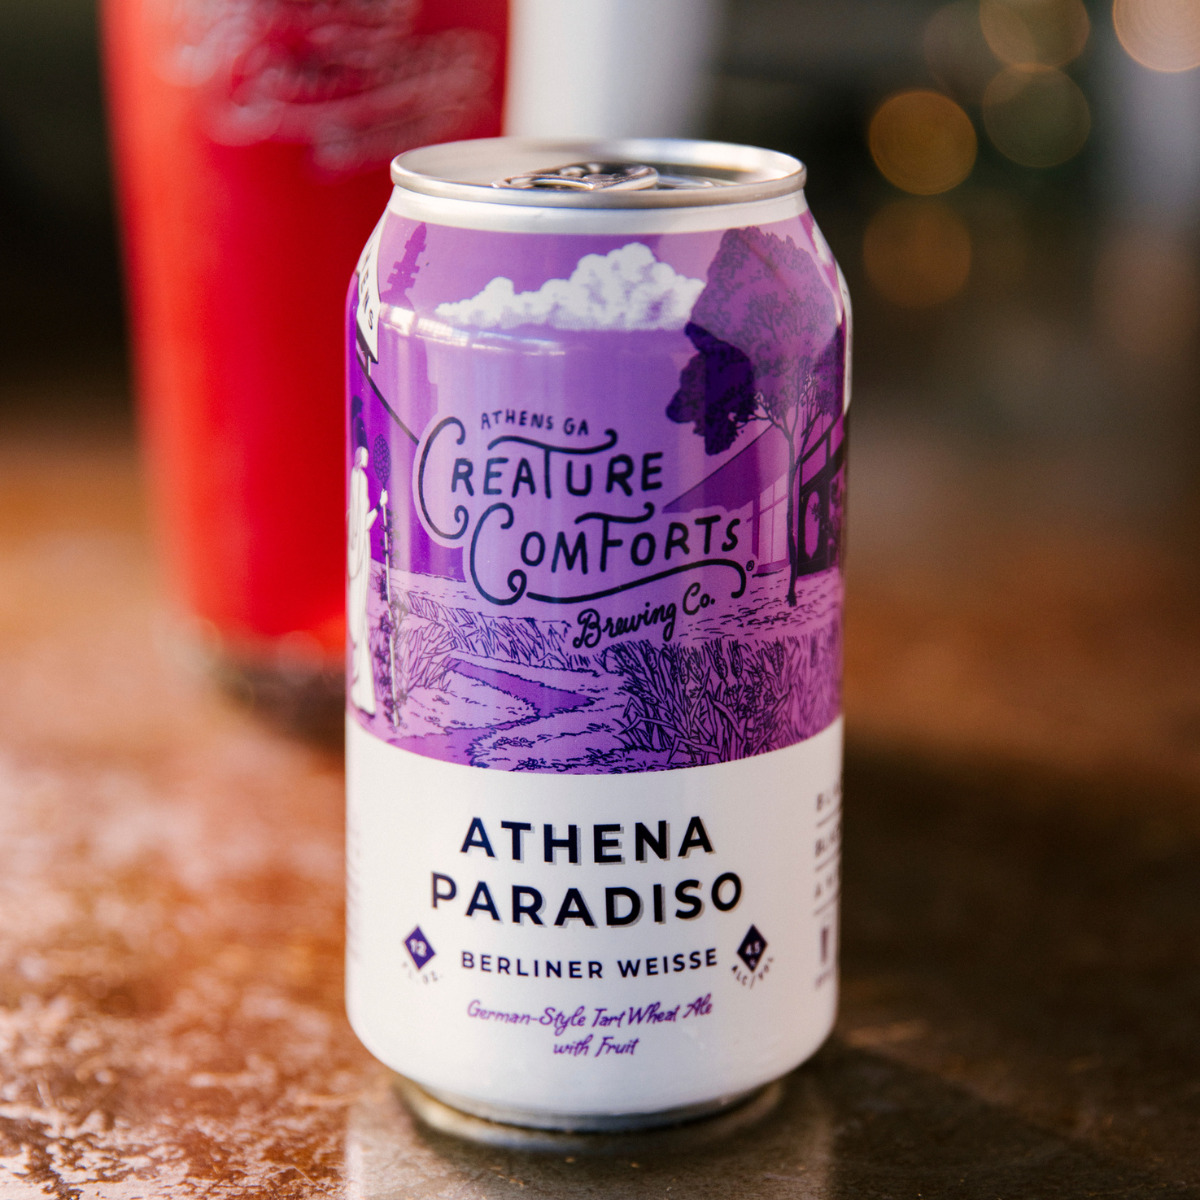 Creature Comforts Athena Paradiso Berliner Weisse 12 ounce can